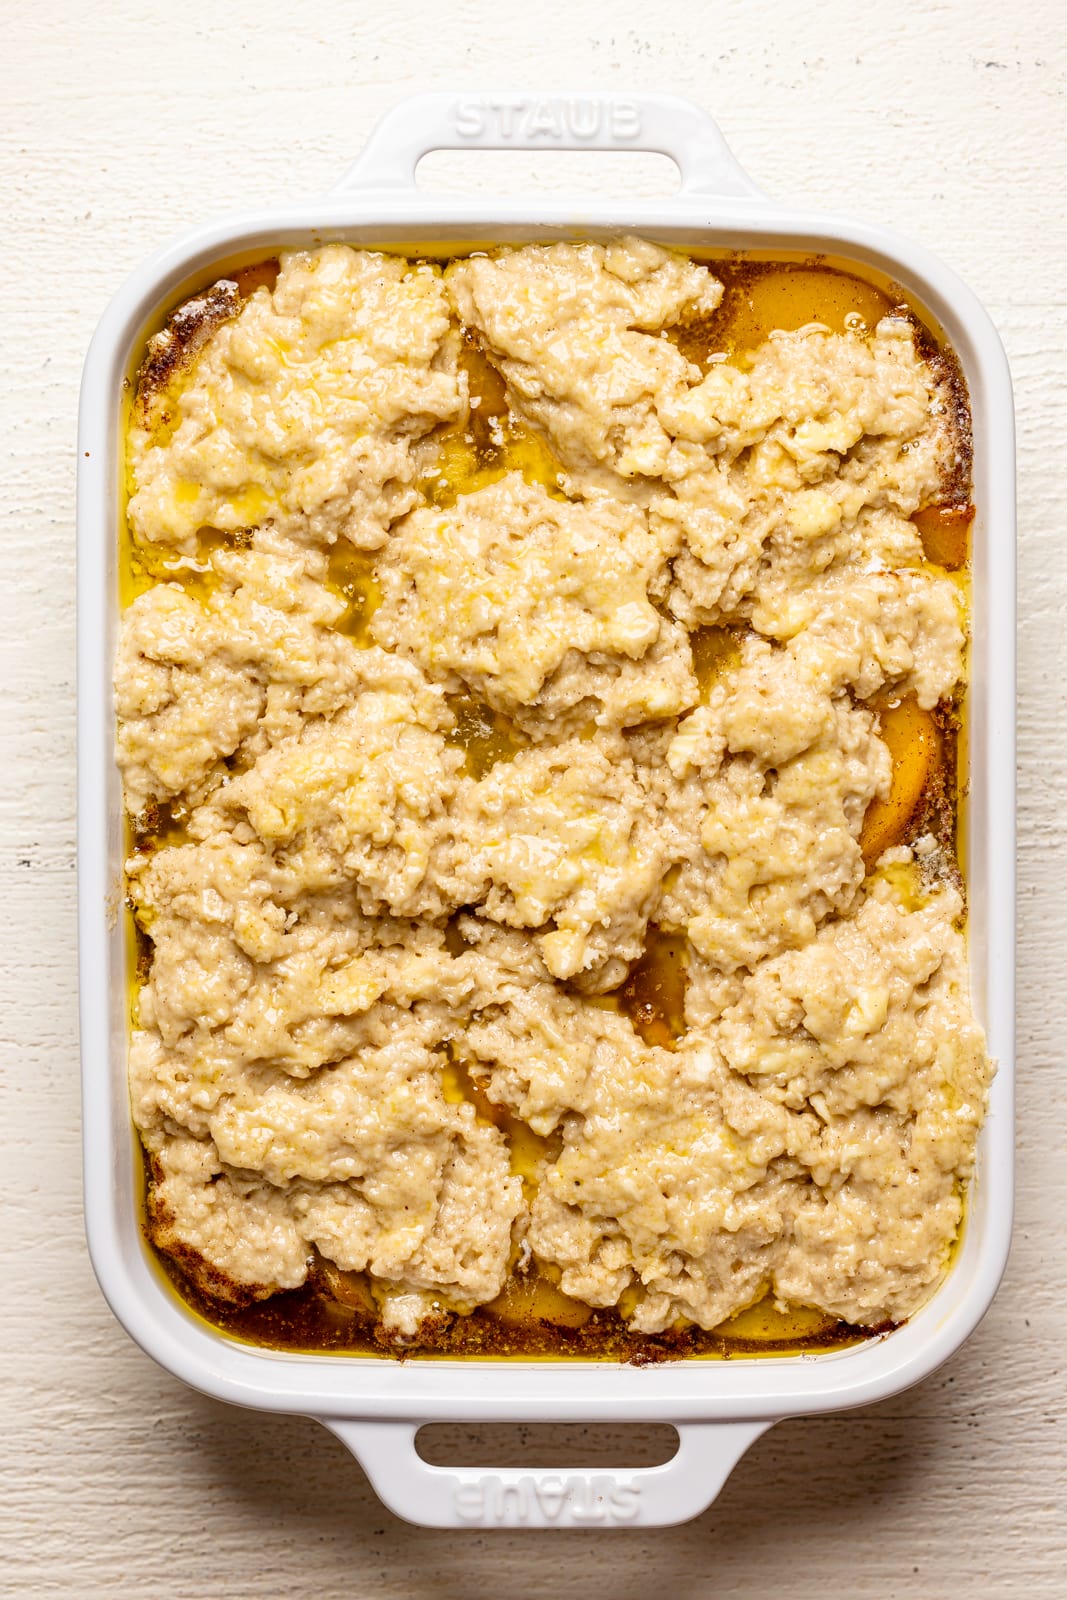 Peach cobbler in a white baking dish on a white wood table.